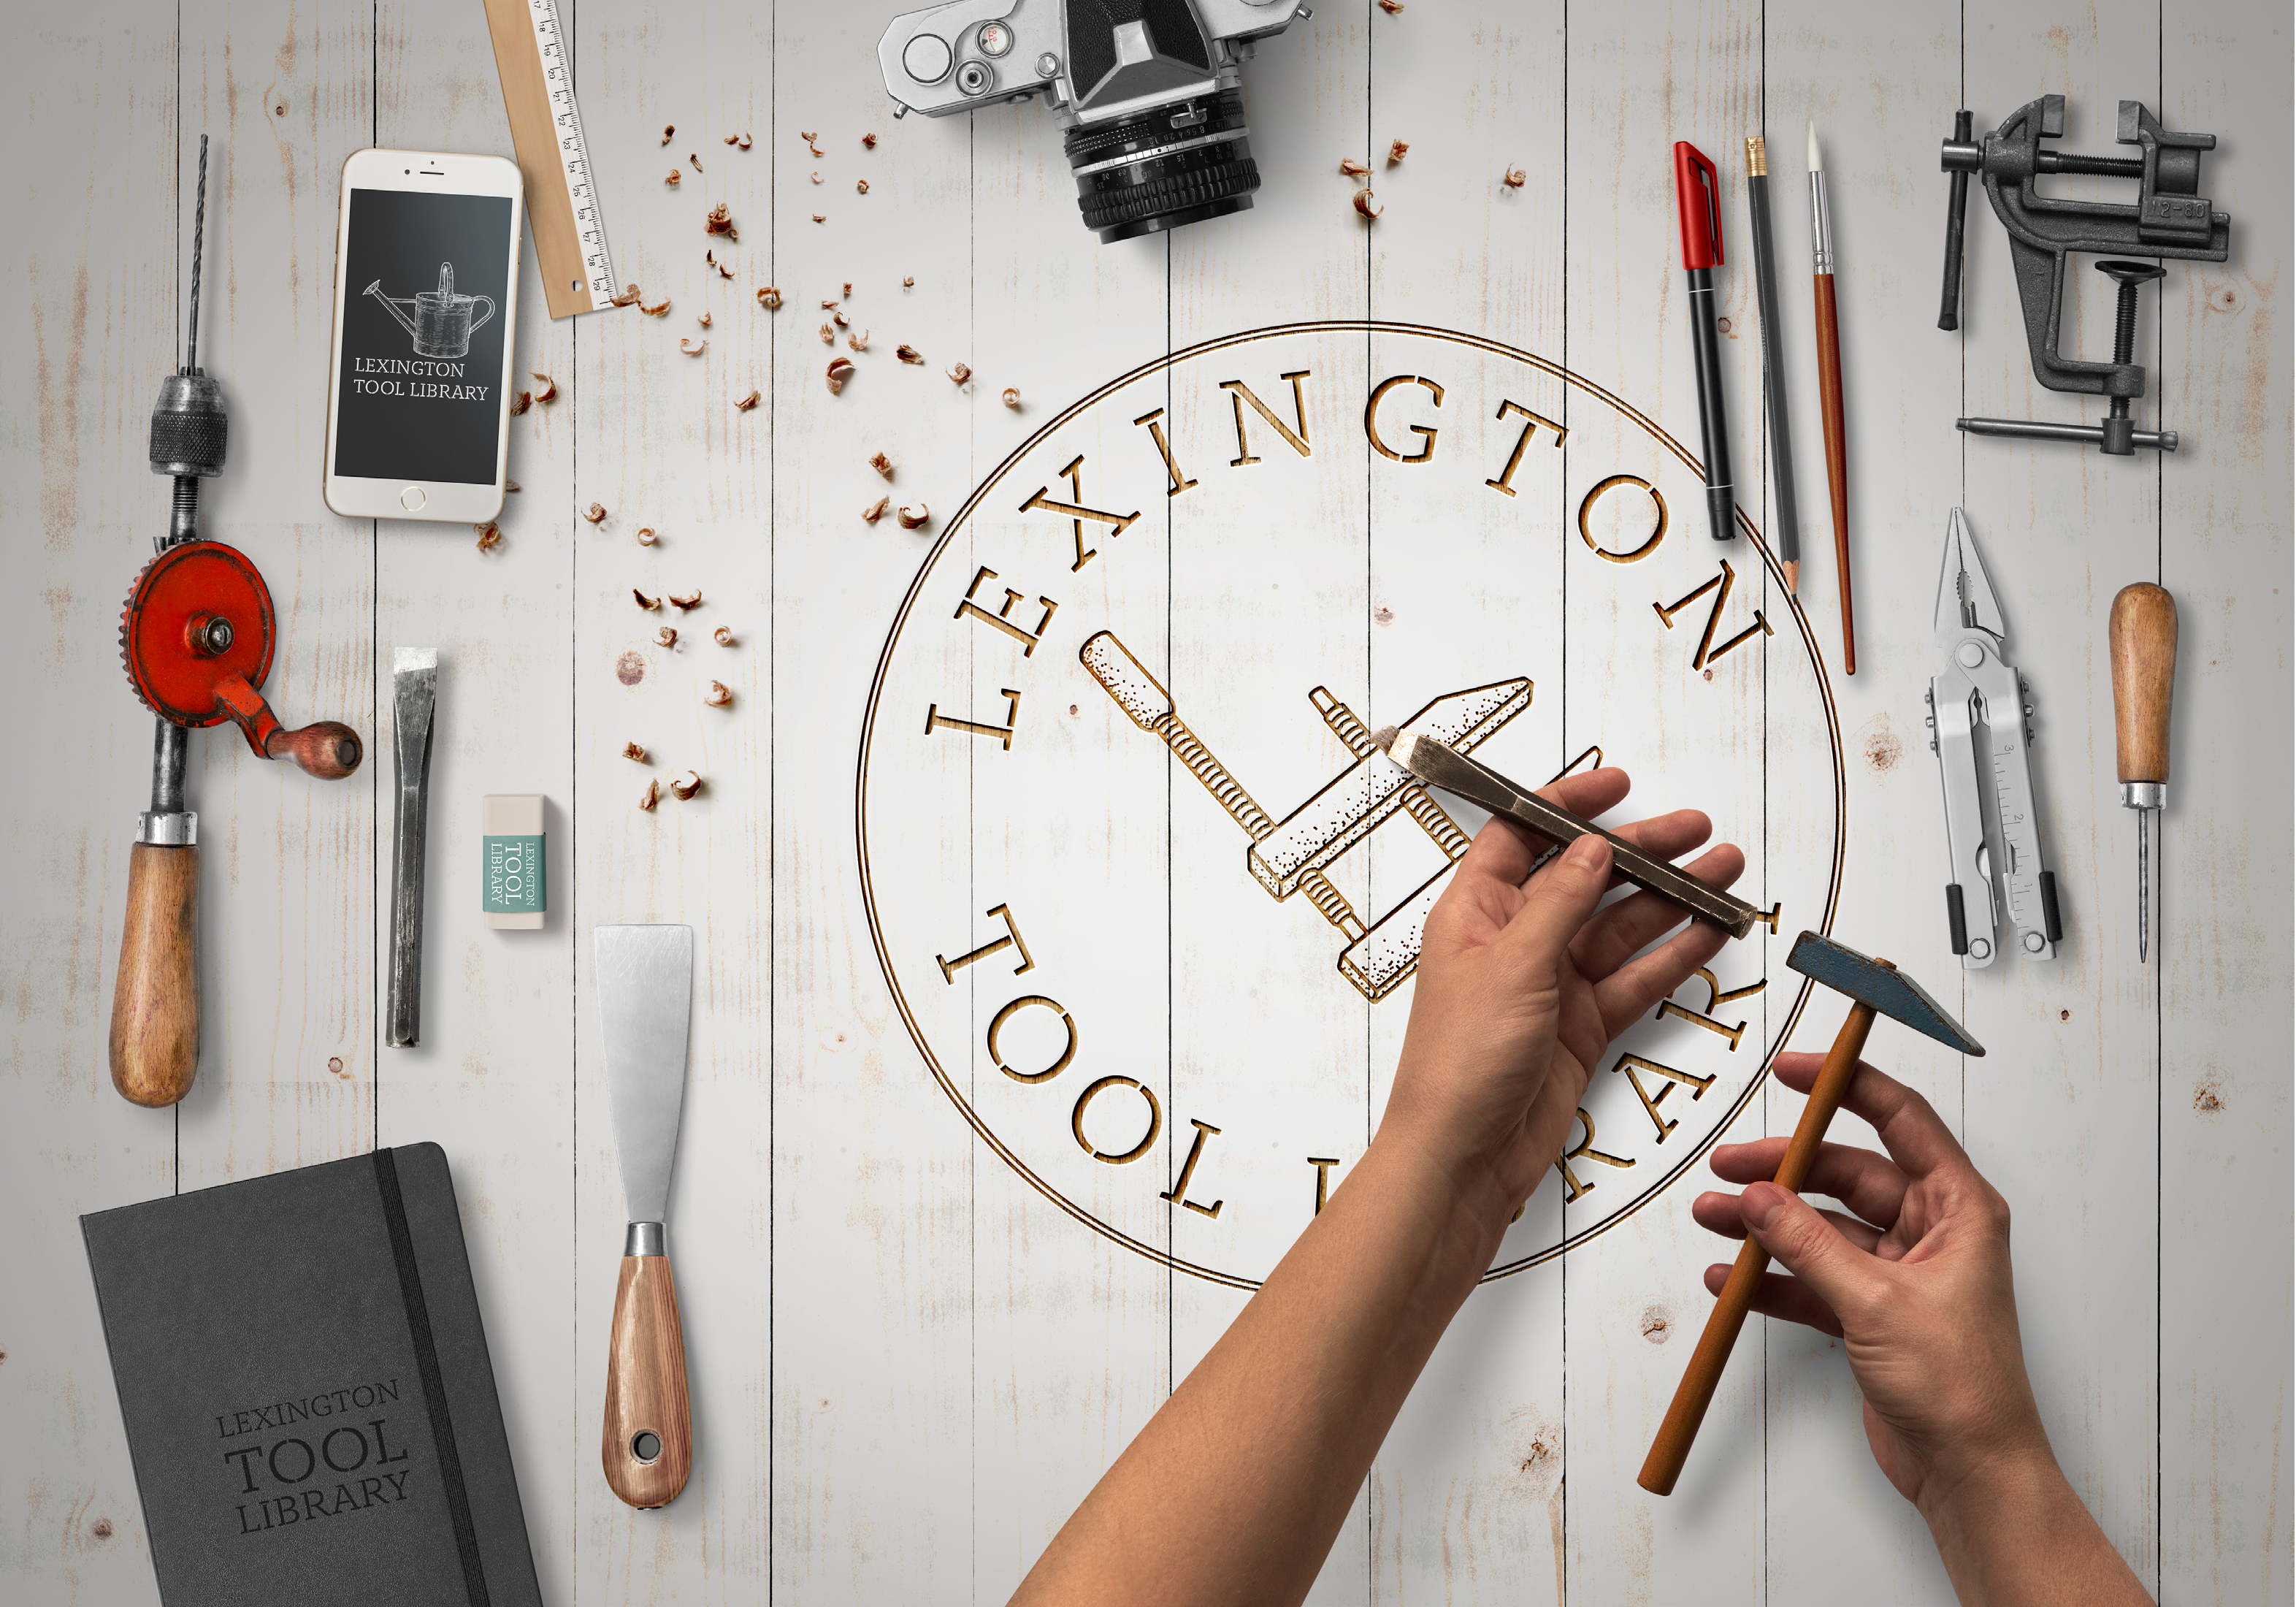 Picture of the Lexington Tool Library logo with hands and many small hand tools strewn about